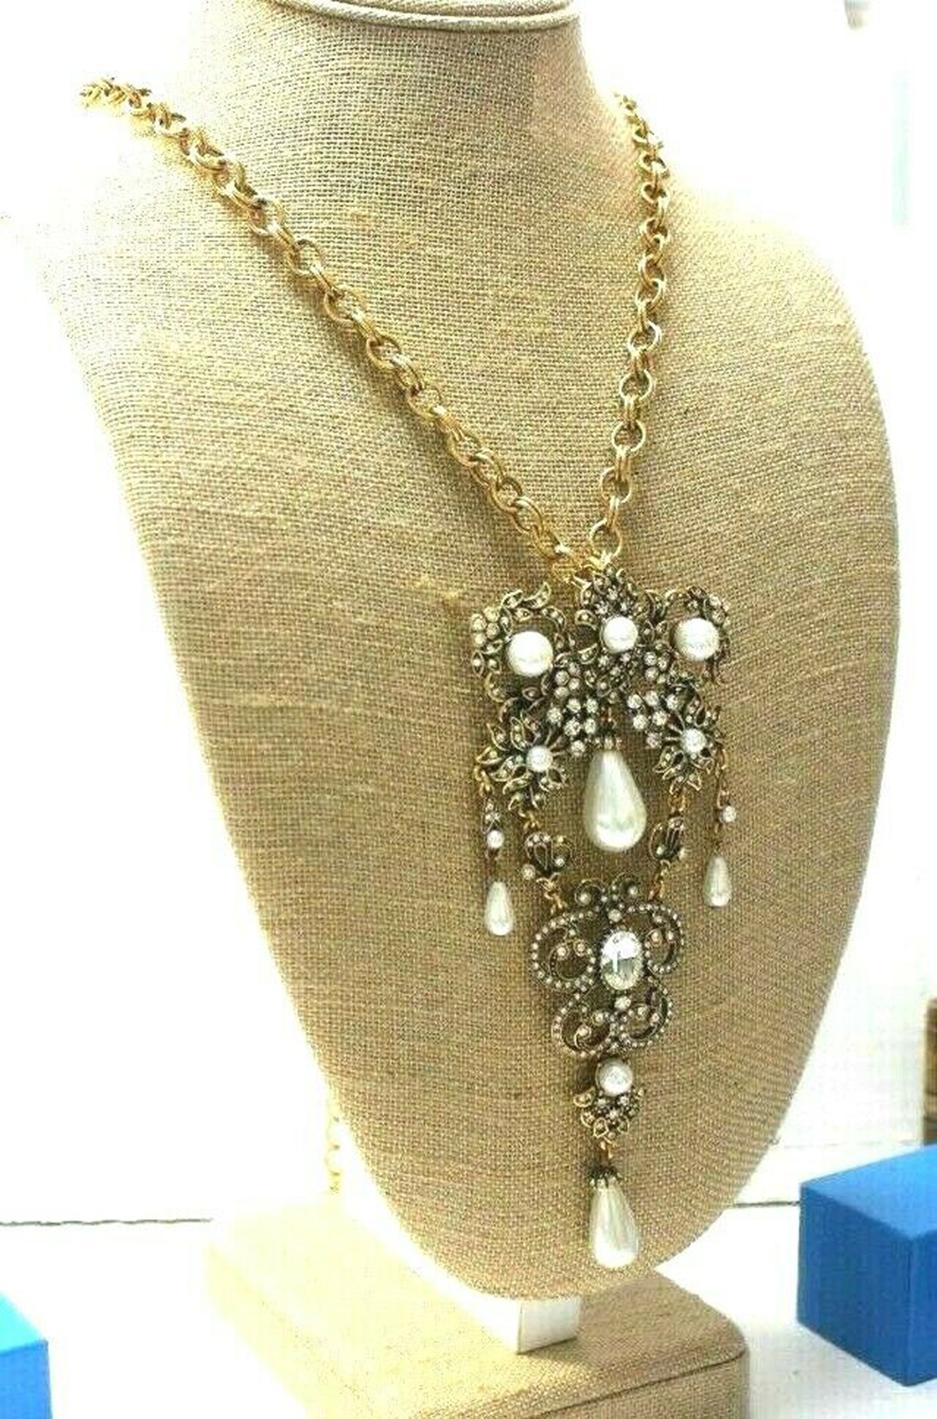 Stunning Signed Oscar de la Renta Haute Couture cable link Necklace suspending a Beautifully crafted Faux Pearl and Sparkling Crystal Pin/Pendant. Necklace measures approx. 33 inches long including dangling faux Pearl Pin/Pendant, measuring approx.